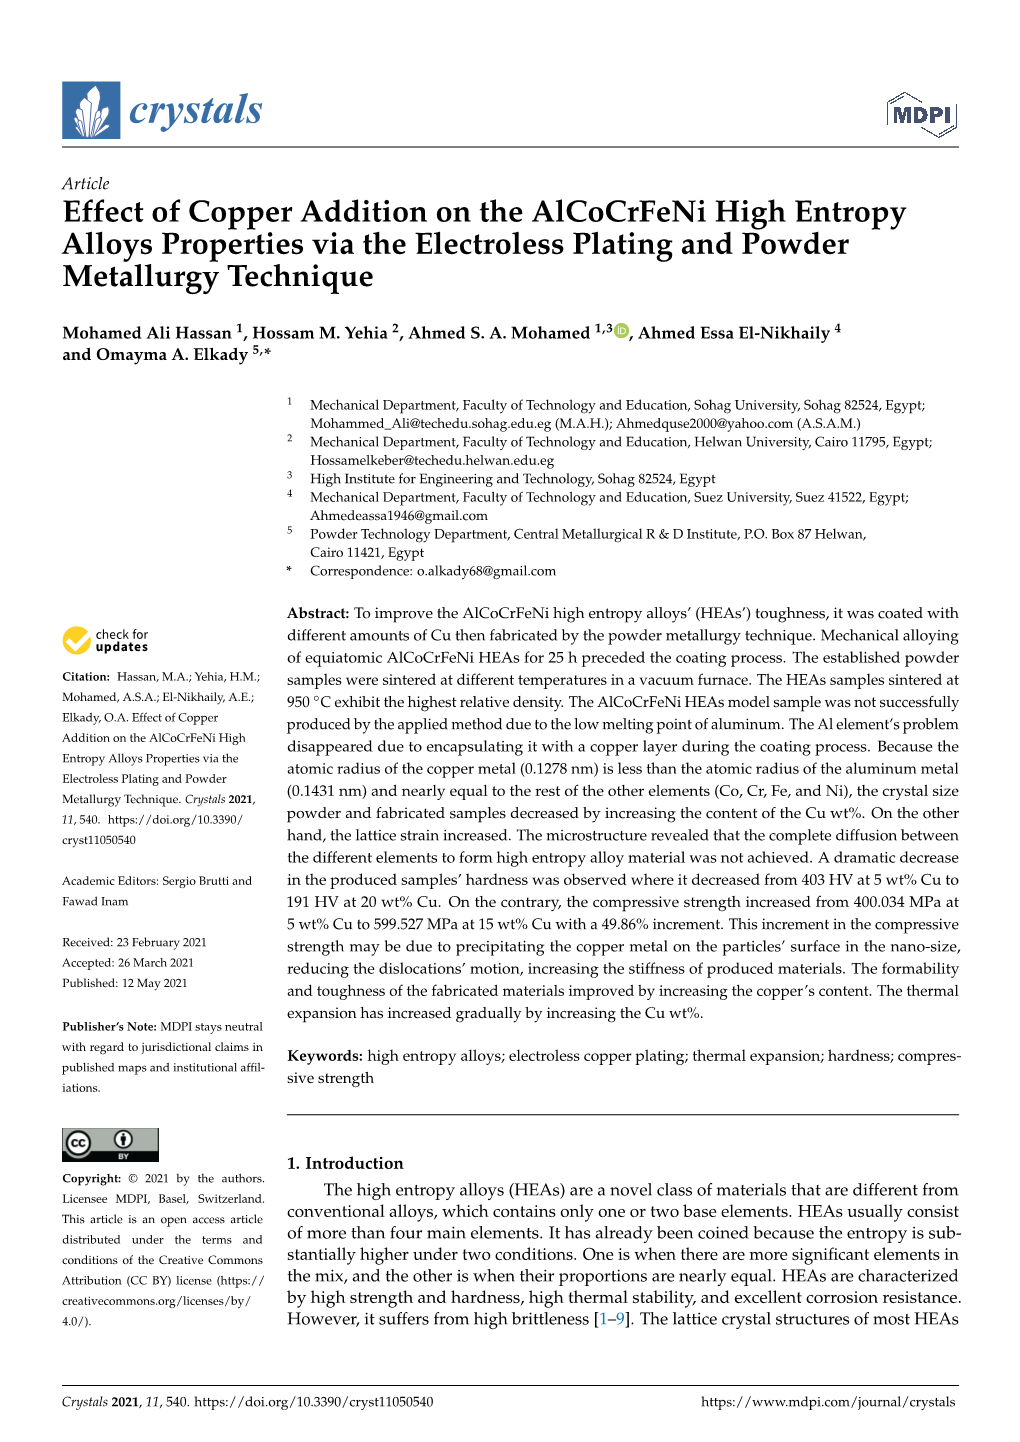 Effect of Copper Addition on the Alcocrfeni High Entropy Alloys Properties Via the Electroless Plating and Powder Metallurgy Technique